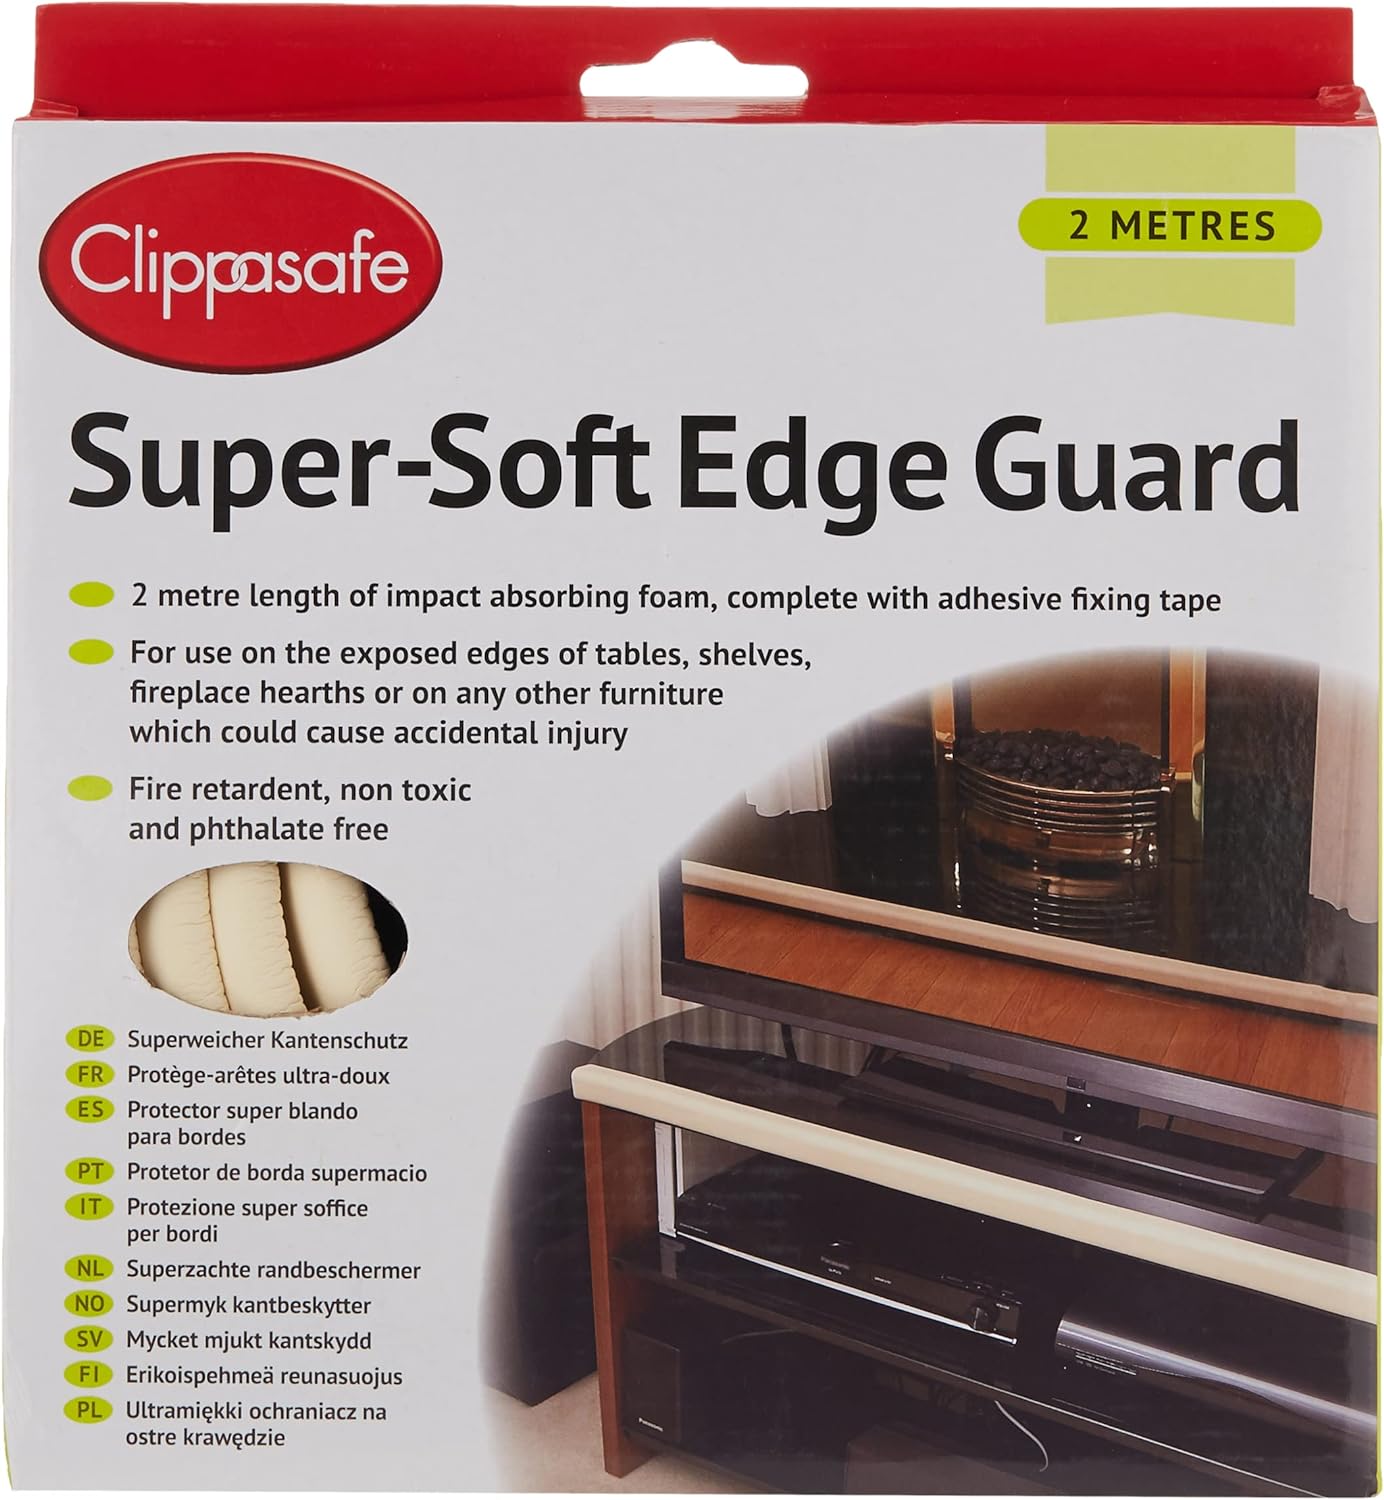 Clippasafe Super-Soft Edge Guard - 2 Metres from Olivers Baby Care